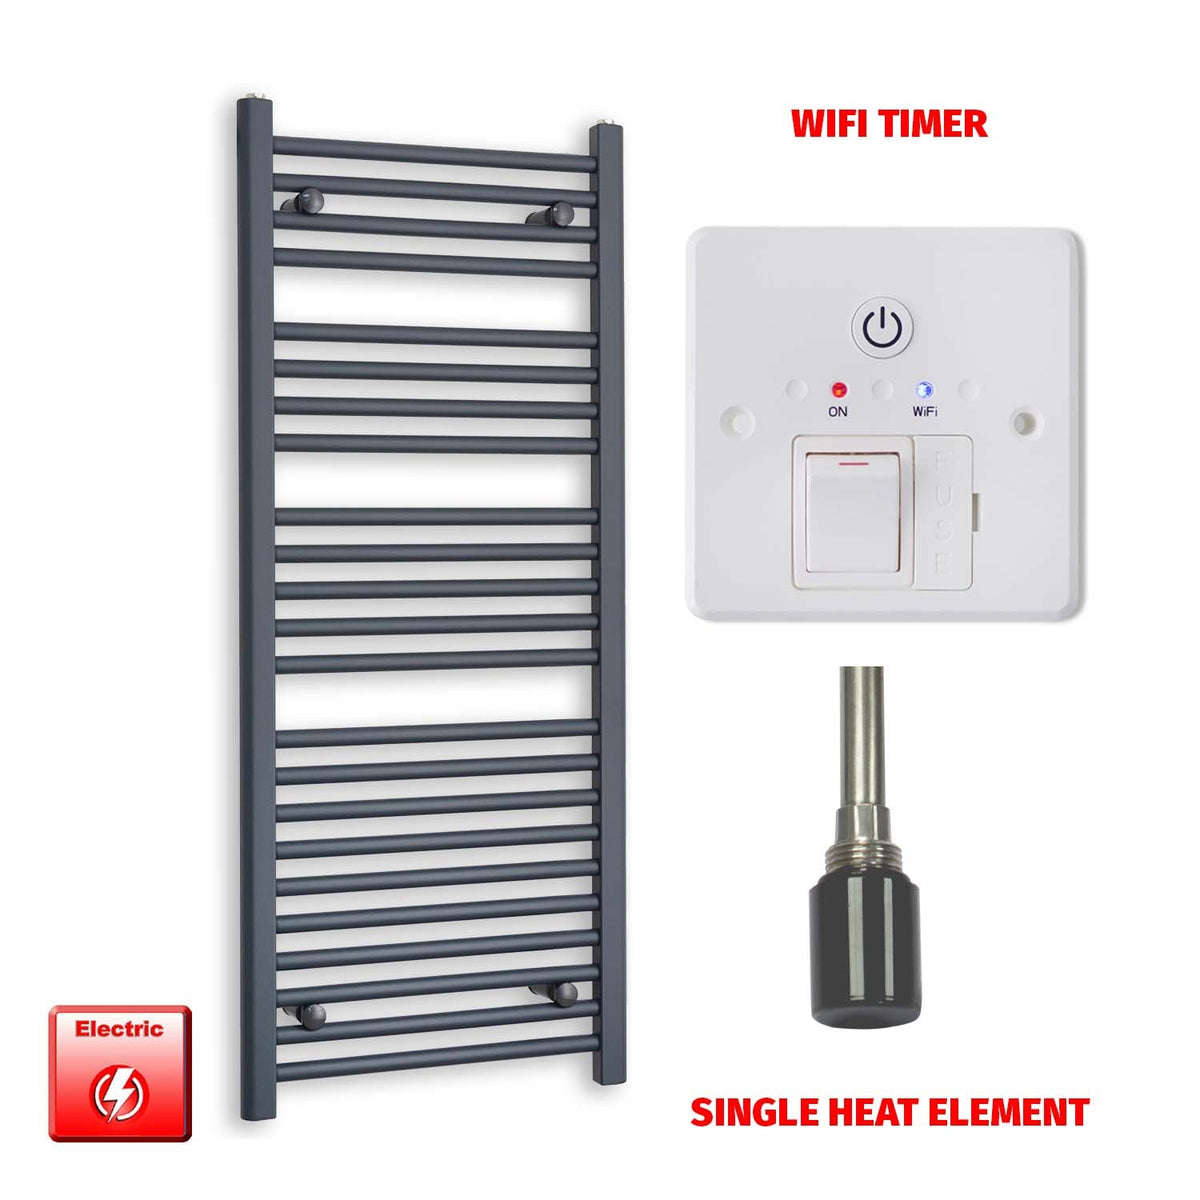 1200mm High 500mm Wide Flat Anthracite Pre-Filled Electric Heated Towel Rail Radiator HTR Single heat element Wifi timer